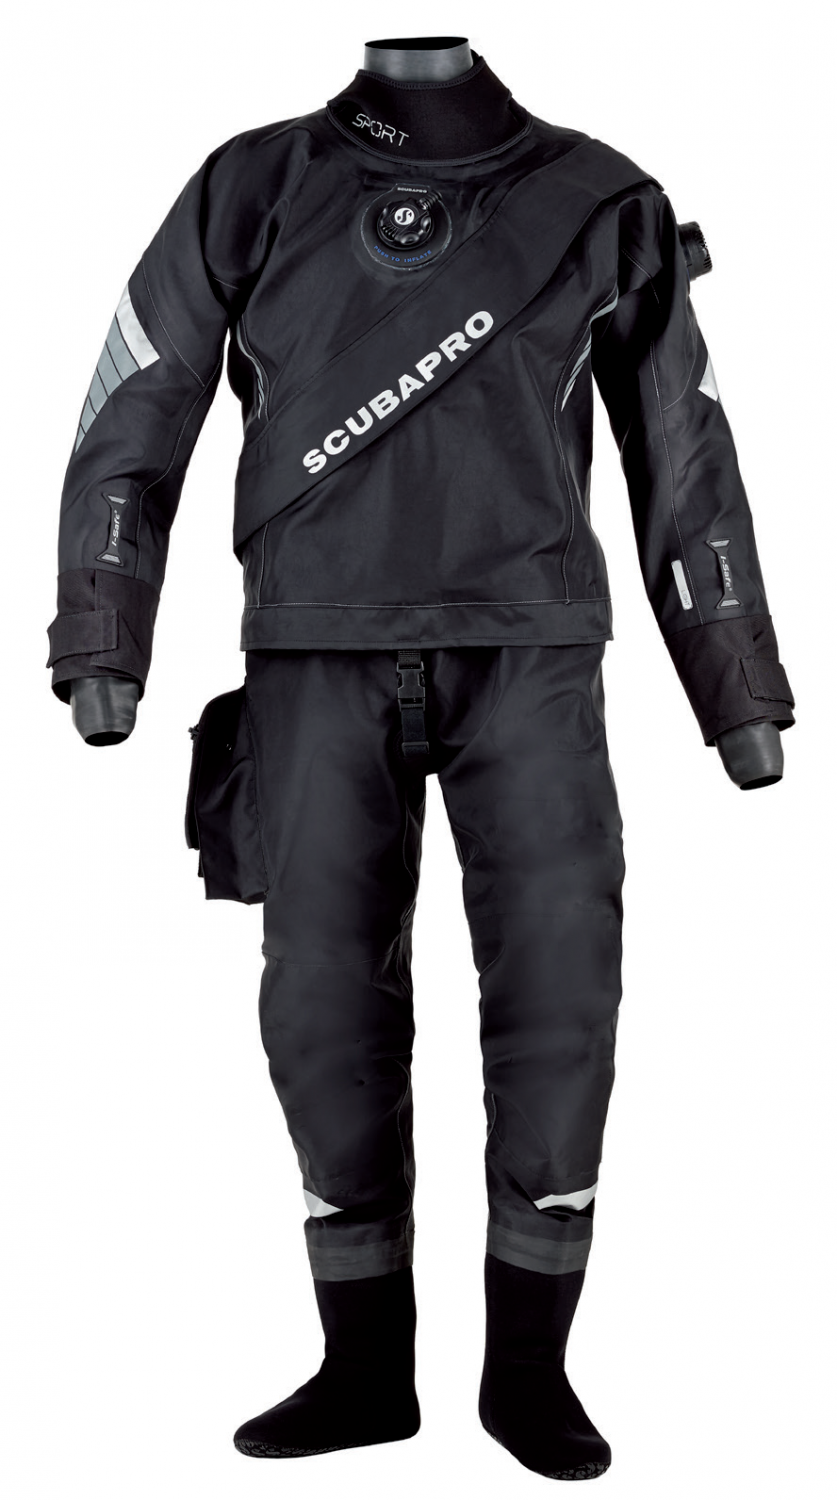 Scubapro Sport Dry - Scubapro Drysuits - Diving 2000 - diving, and swimming